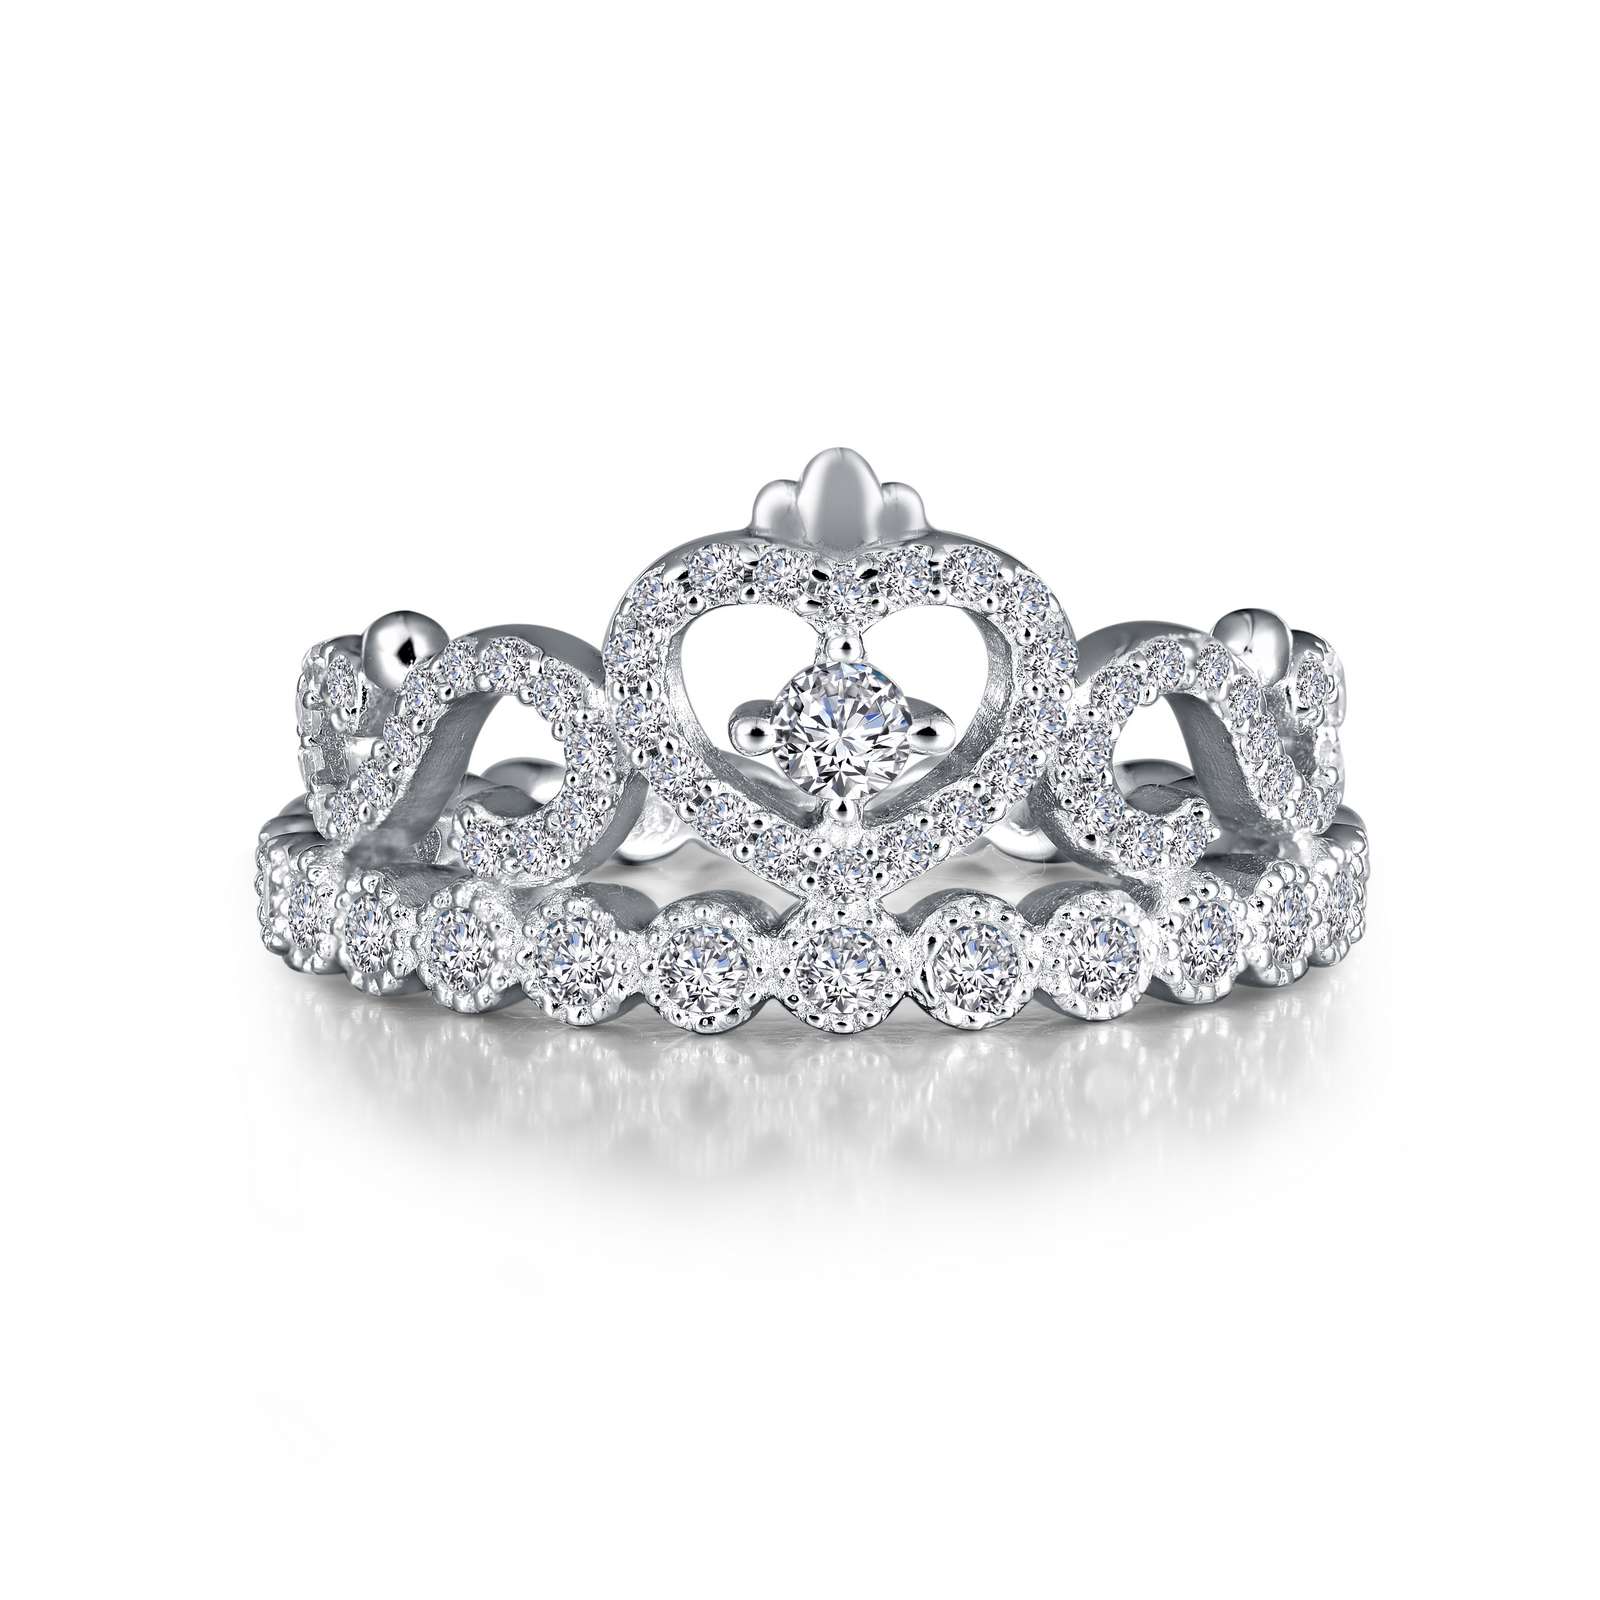 Crown Eternity Ring Griner Jewelry Co. Moultrie, GA